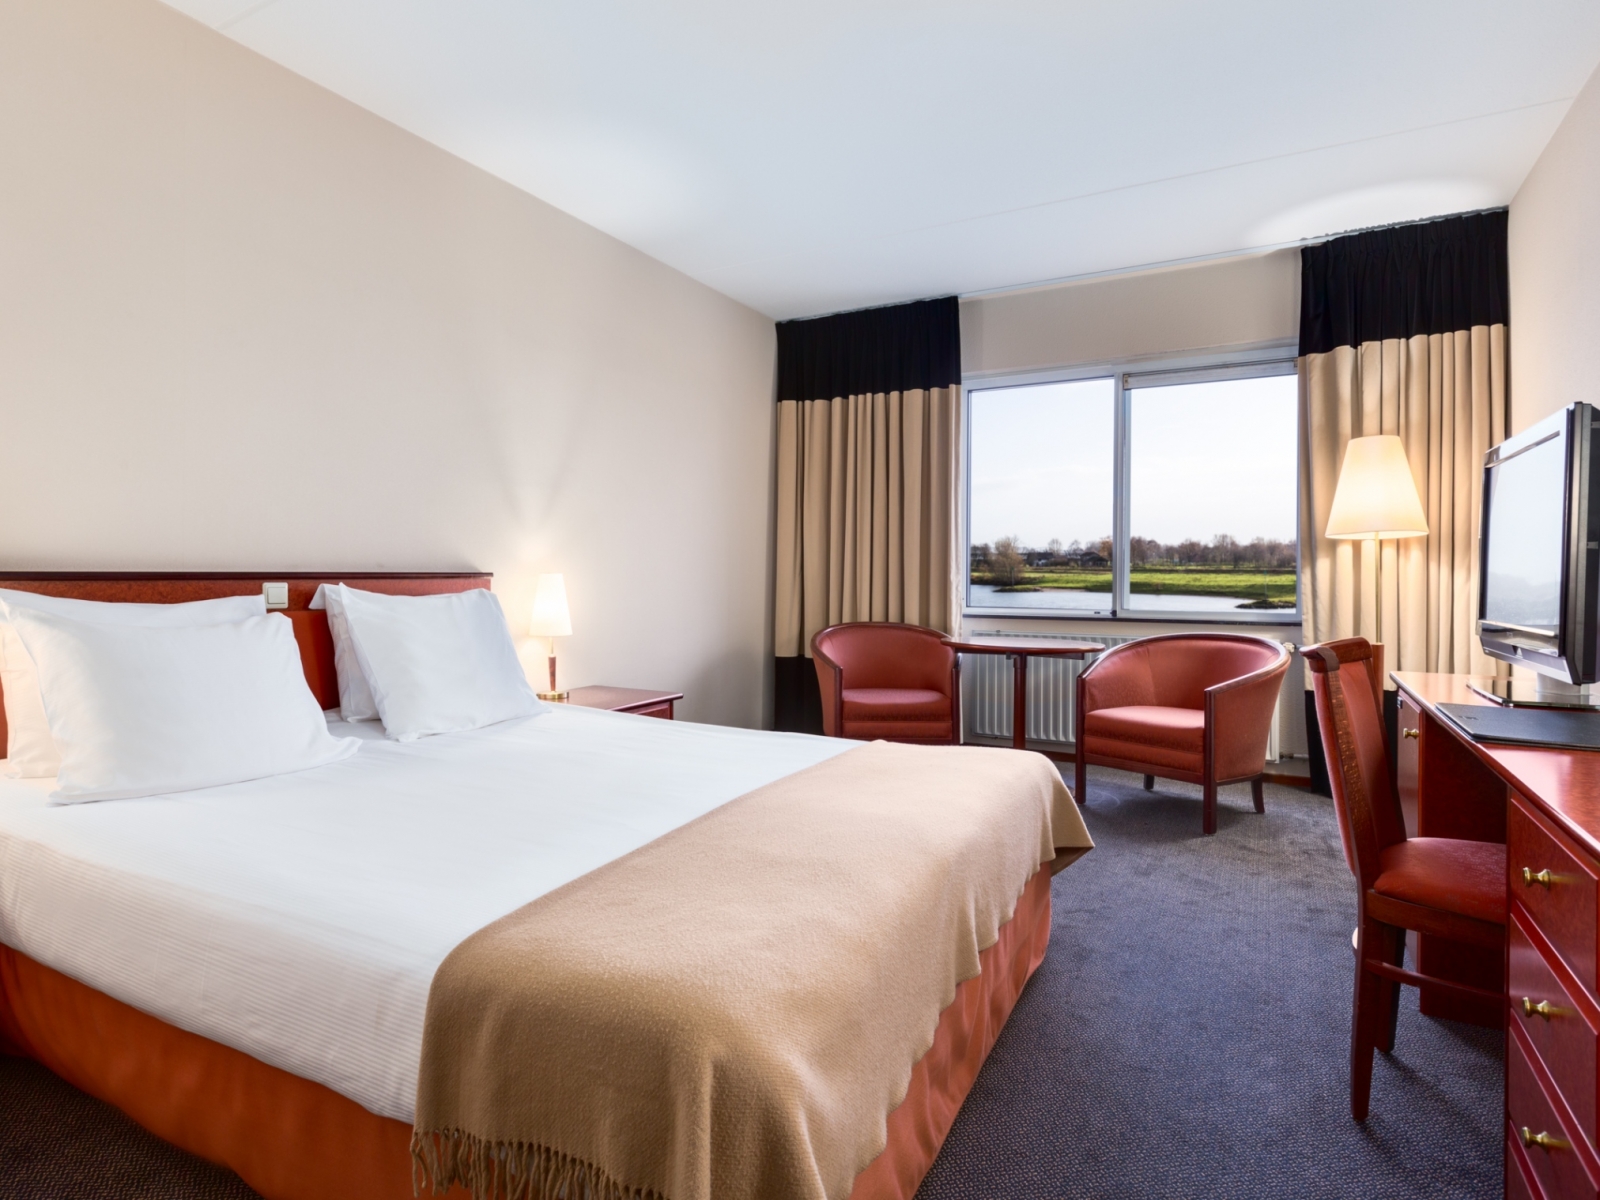 NH Arnhem Rijnhotel <br/>73.00 ew <br/> <a href='http://vakantieoplossing.nl/outpage/?id=6759fa53ee63f1505ad6d61dfb15684a' target='_blank'>View Details</a>